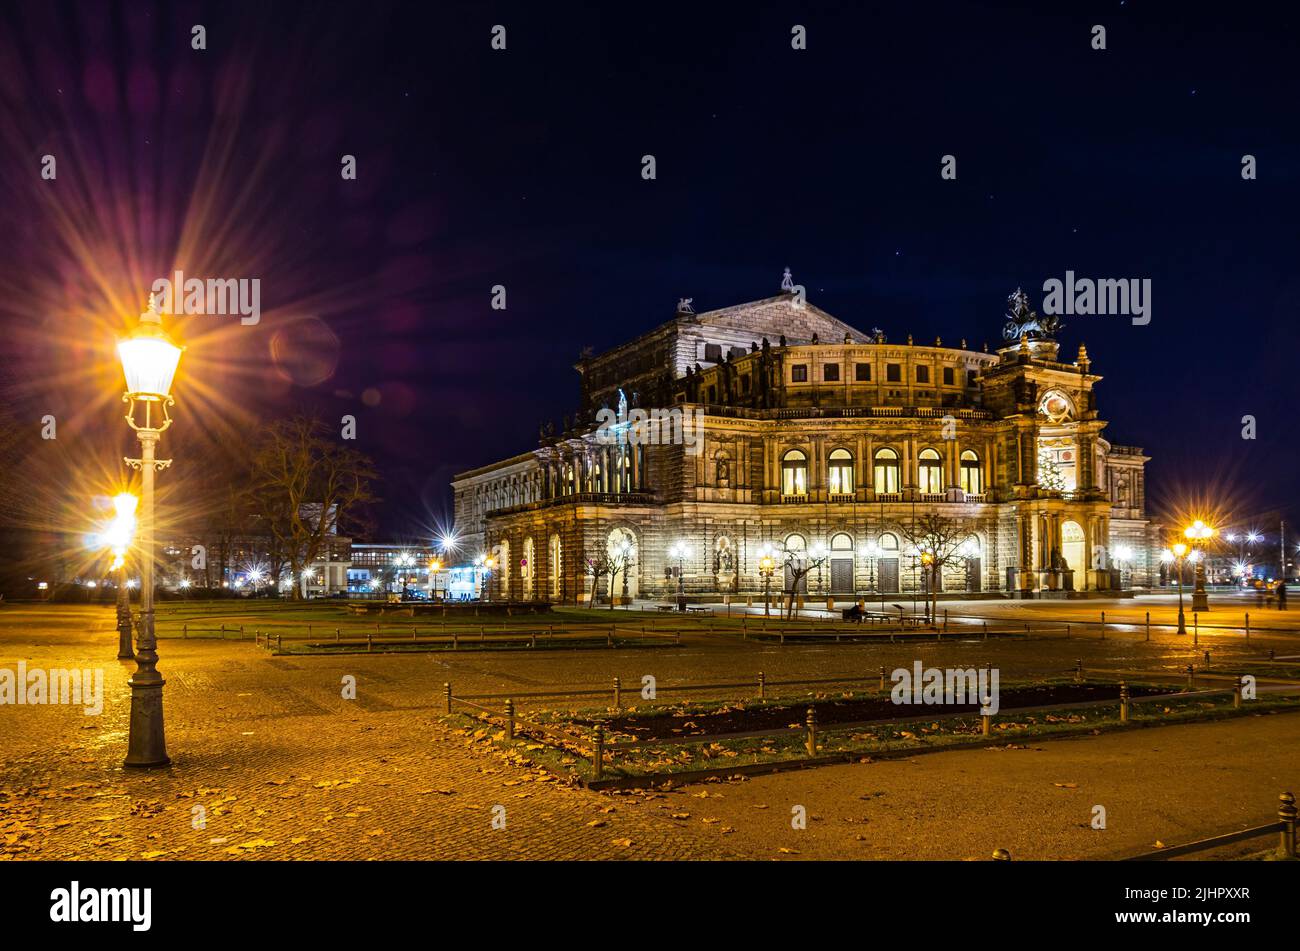 The illuminated world-famous Semper Opera House at night, Theater Square in Dresden, Saxony, Germany. Stock Photo